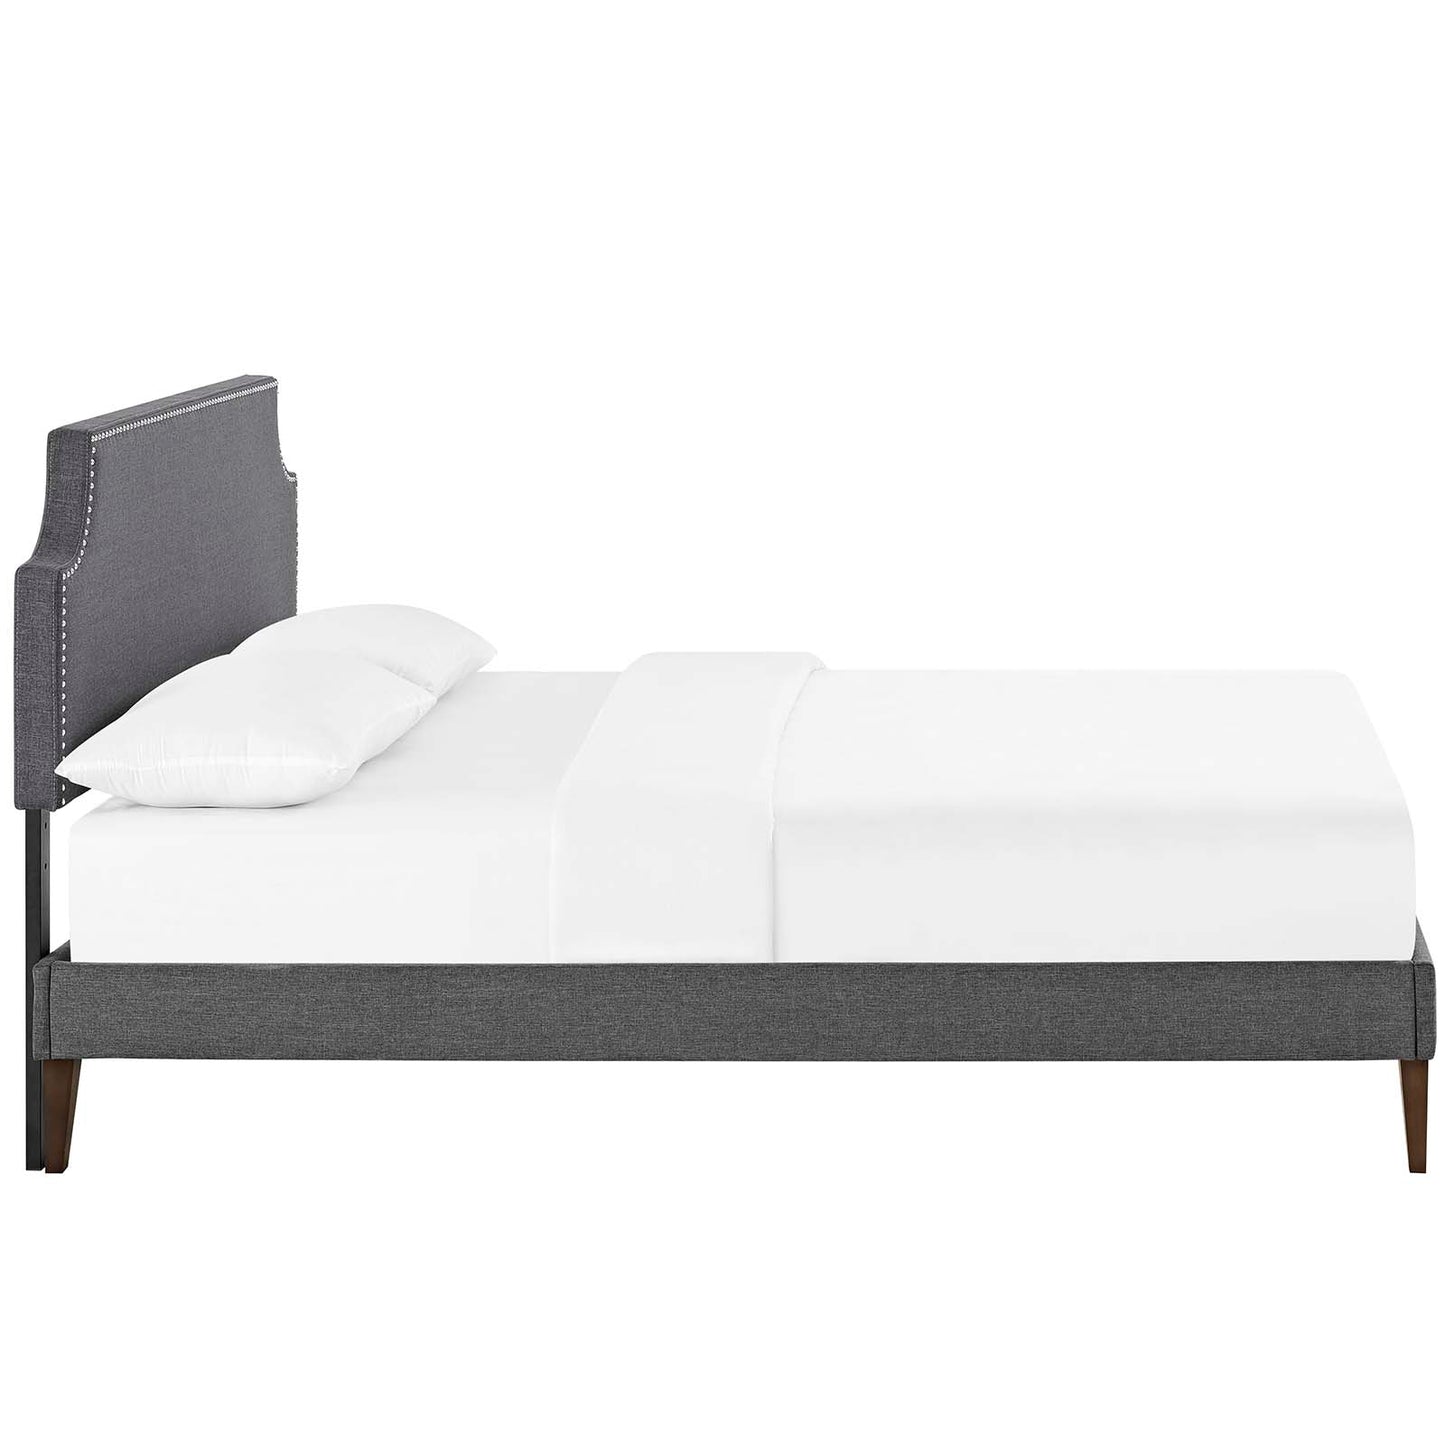 Corene Full Fabric Platform Bed with Squared Tapered Legs Gray MOD-5953-GRY